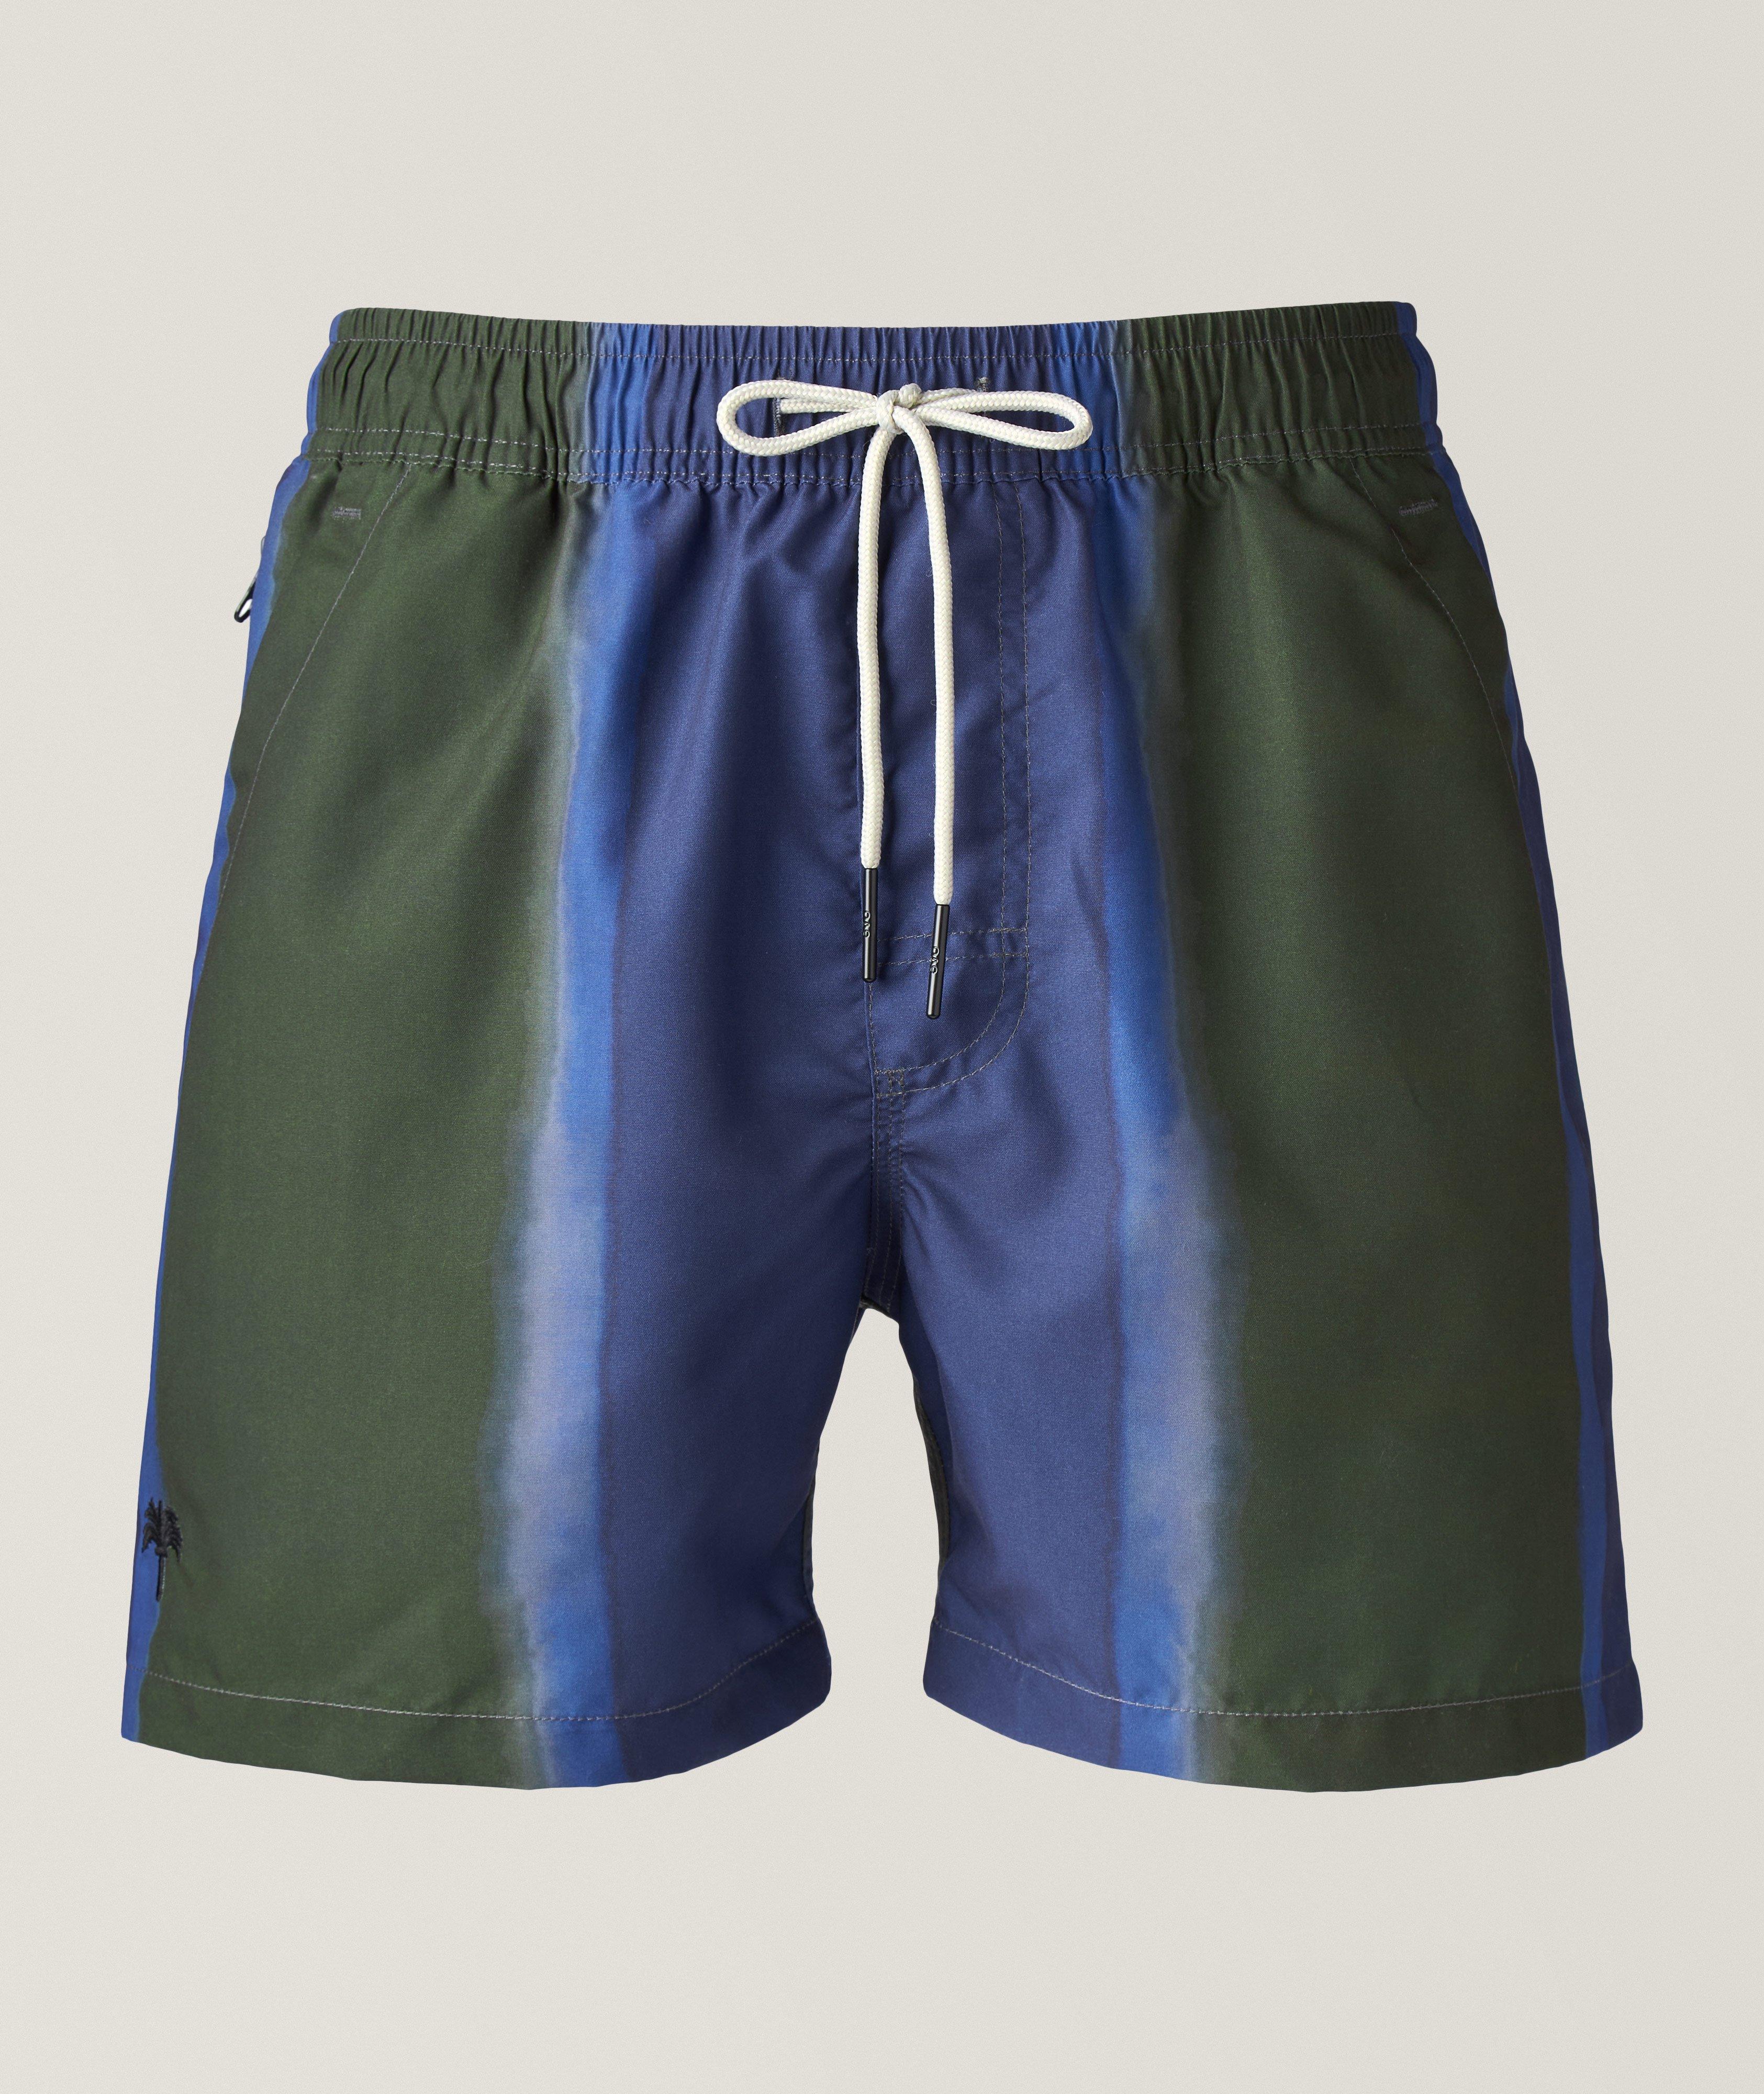 Striped Technical Fabric Swimshorts image 0